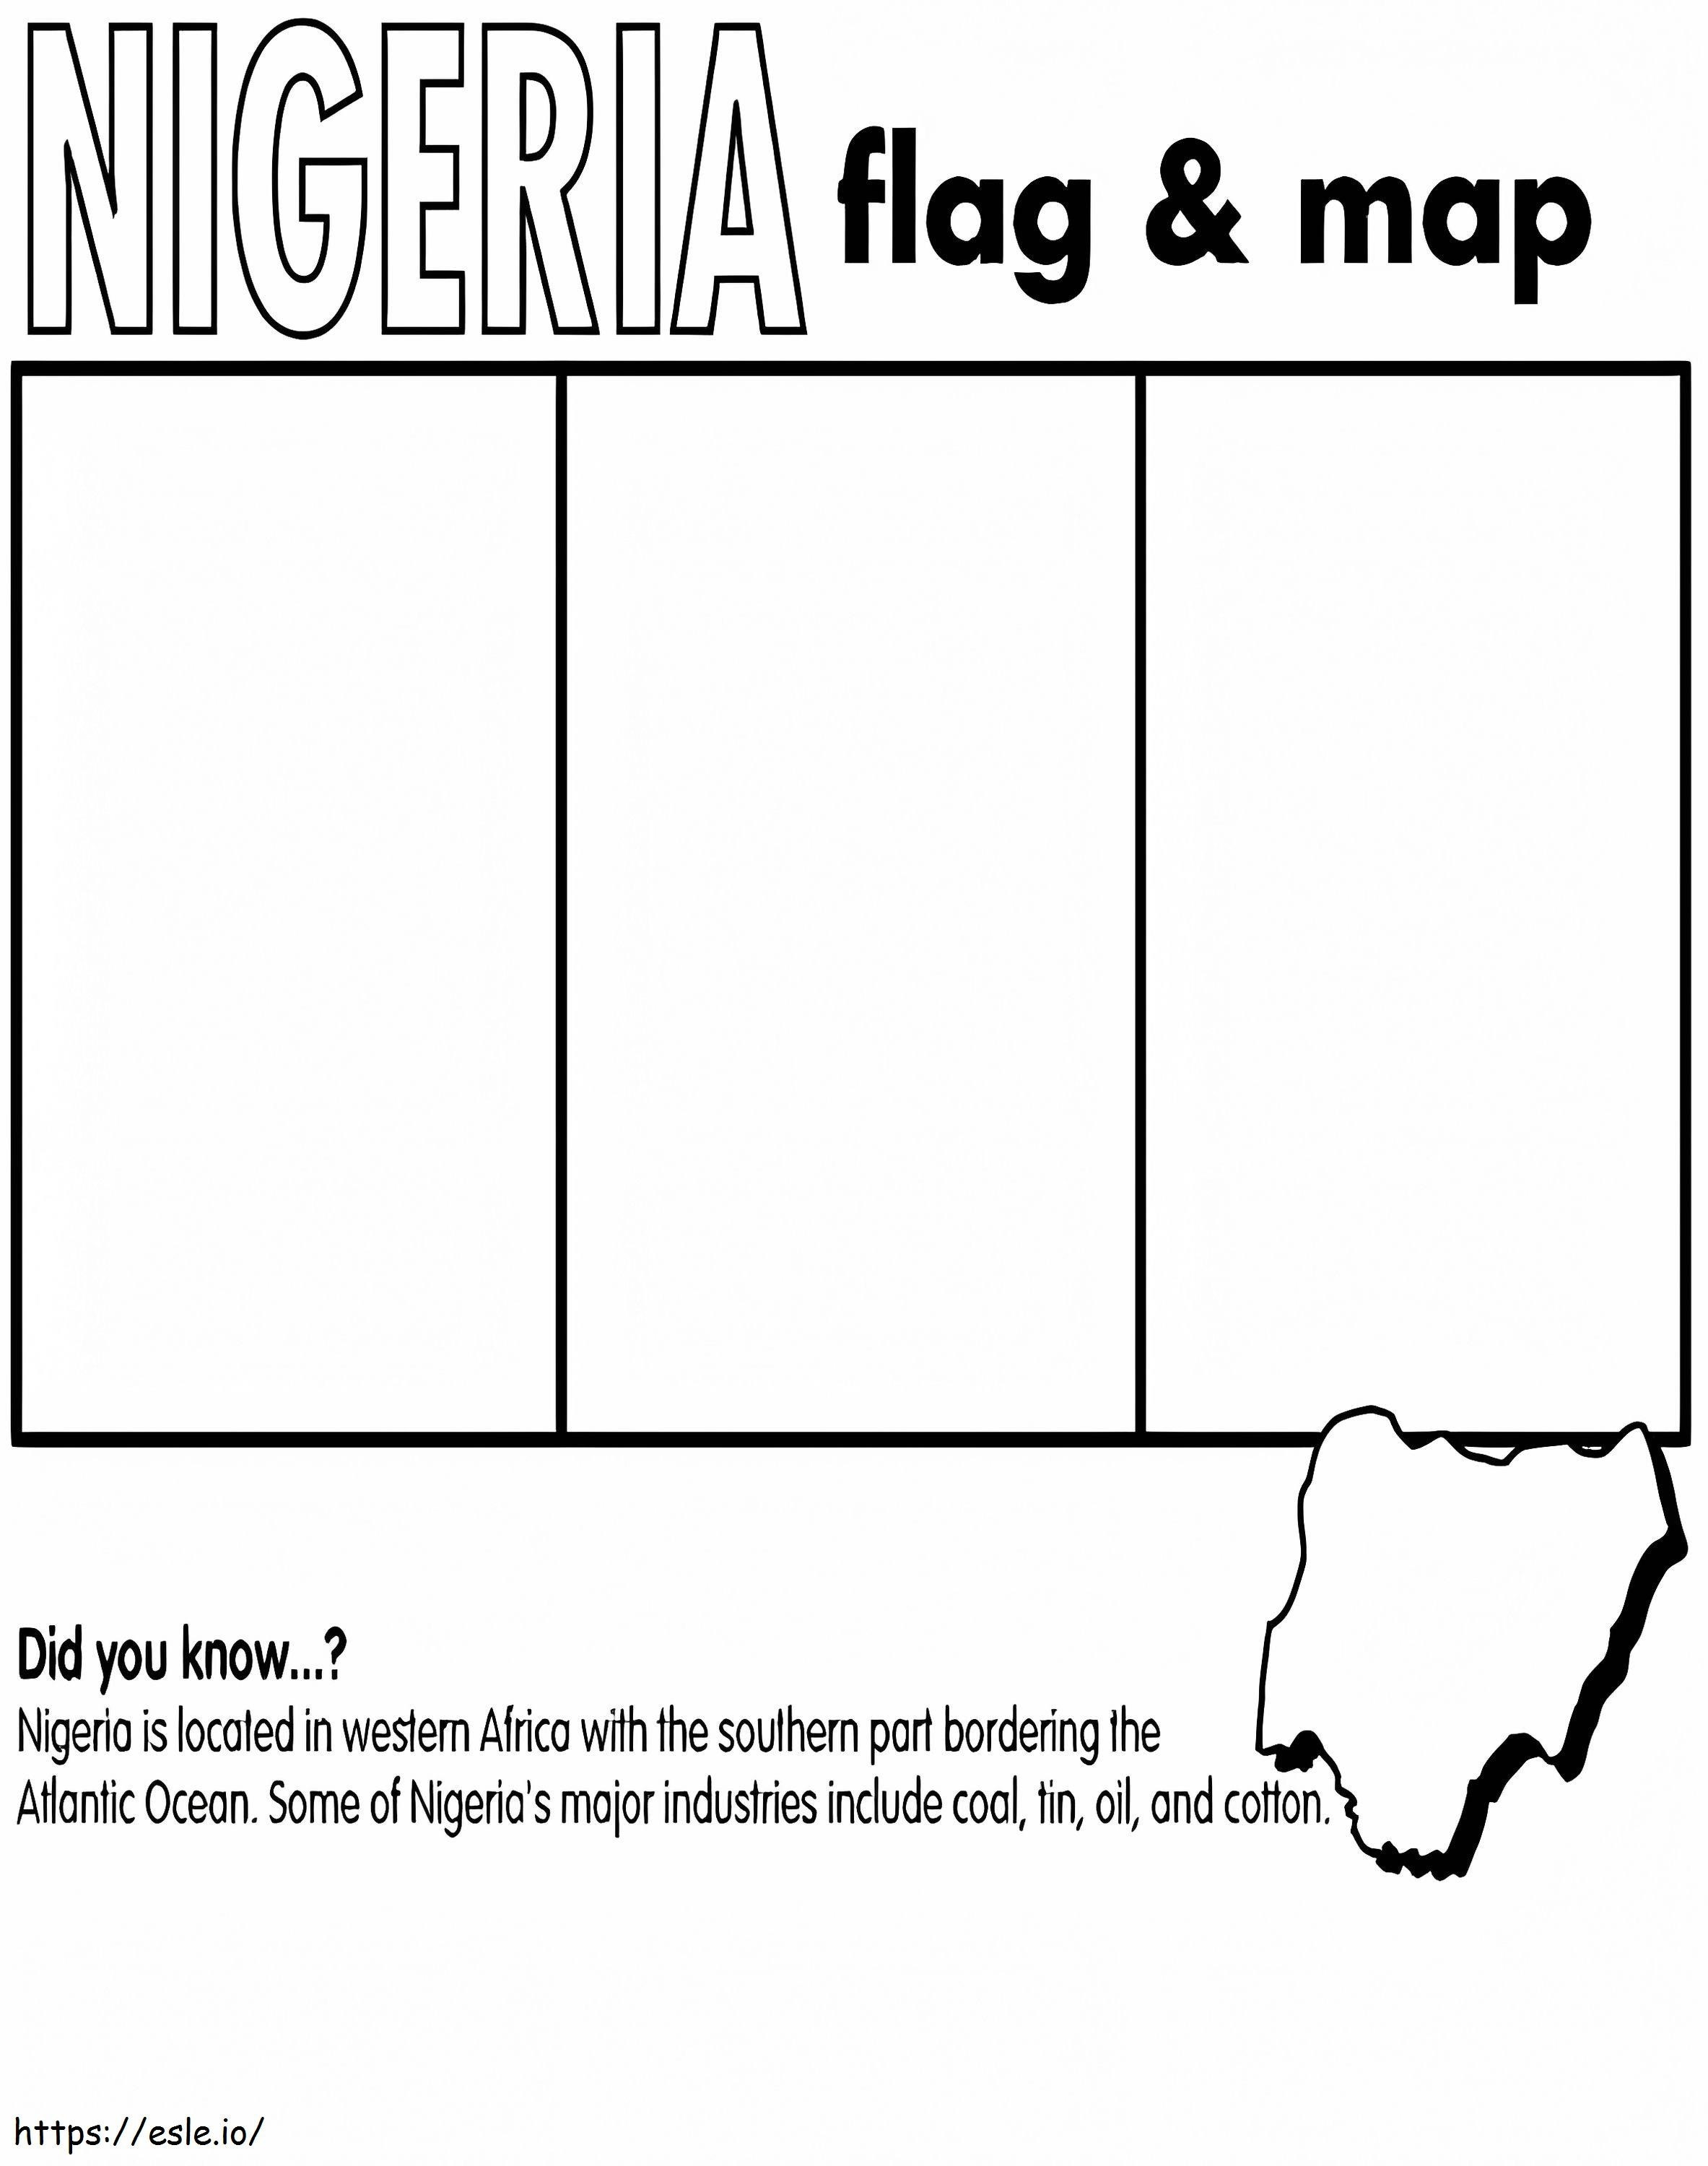 Nigeria Flag And Map coloring page